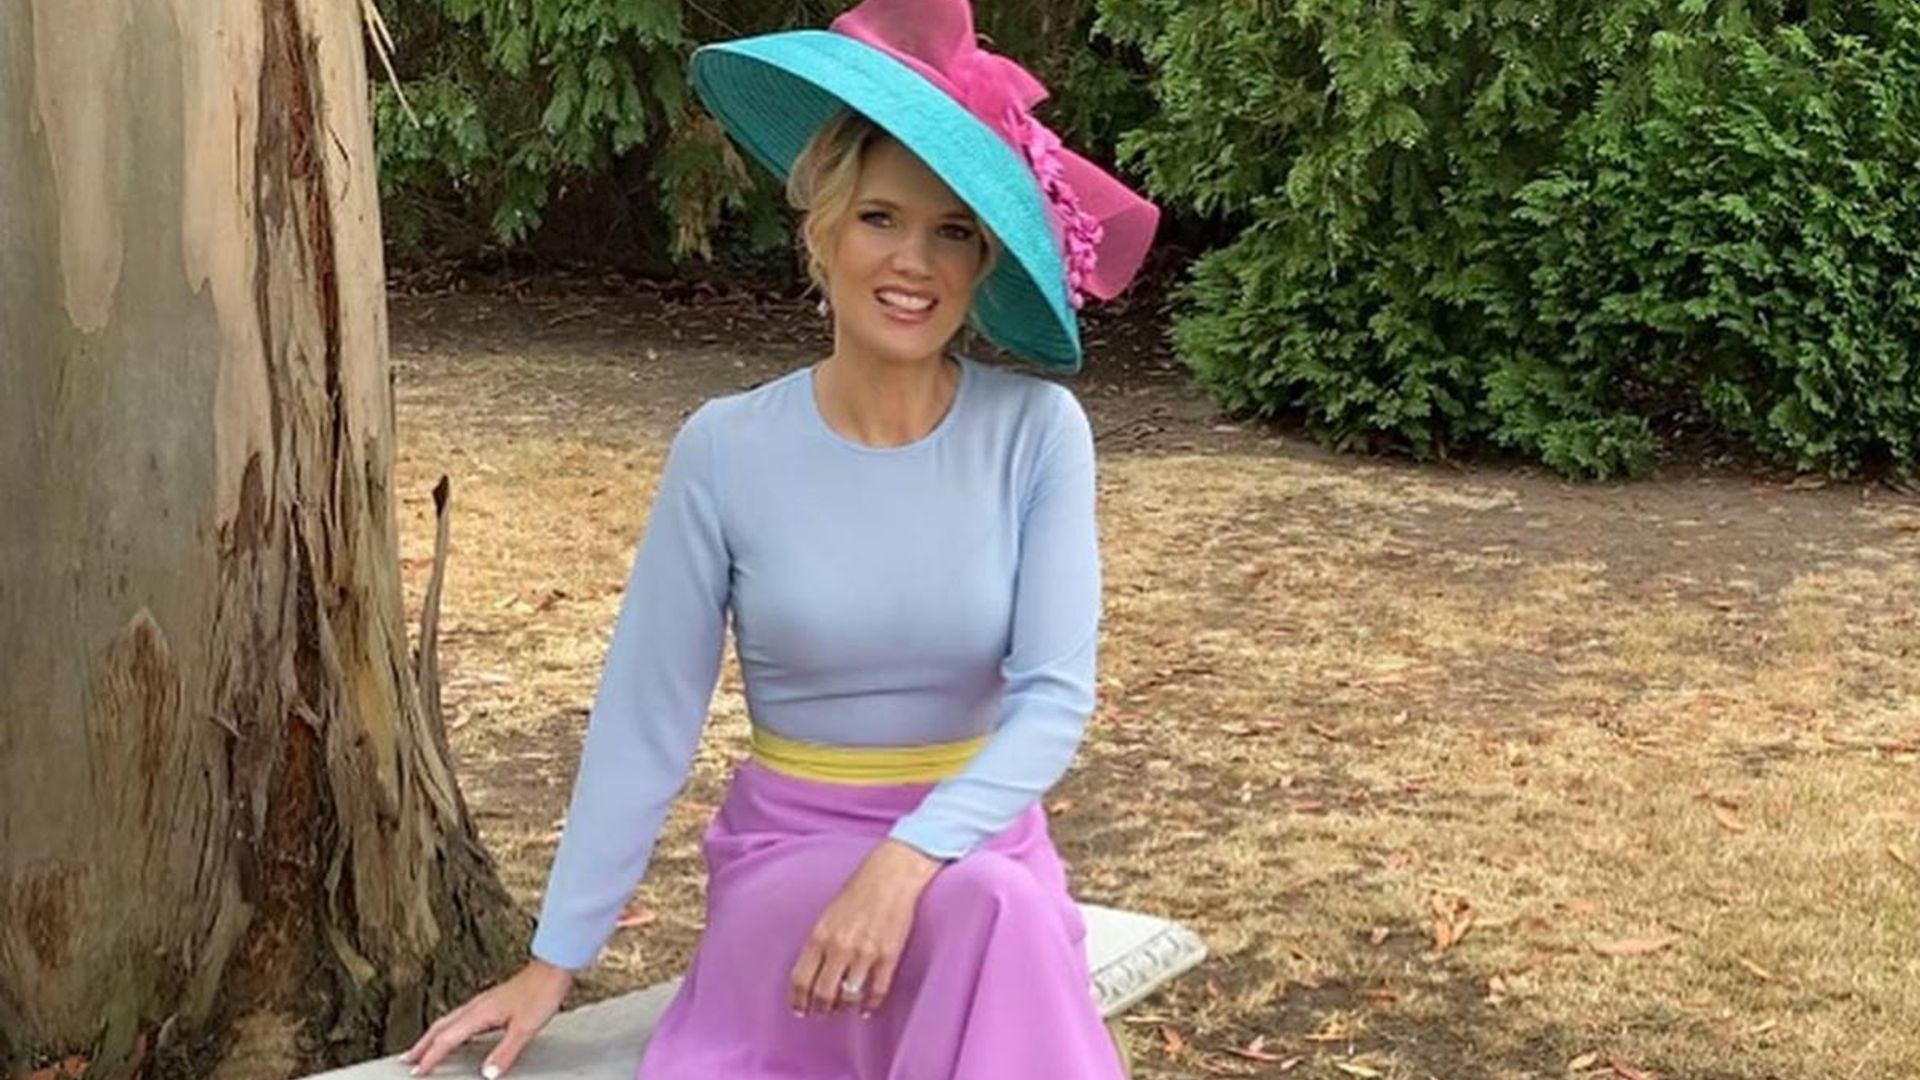 Charlotte Hawkins surprises in a rainbow dress at Royal Ascot - wait 'til you see it